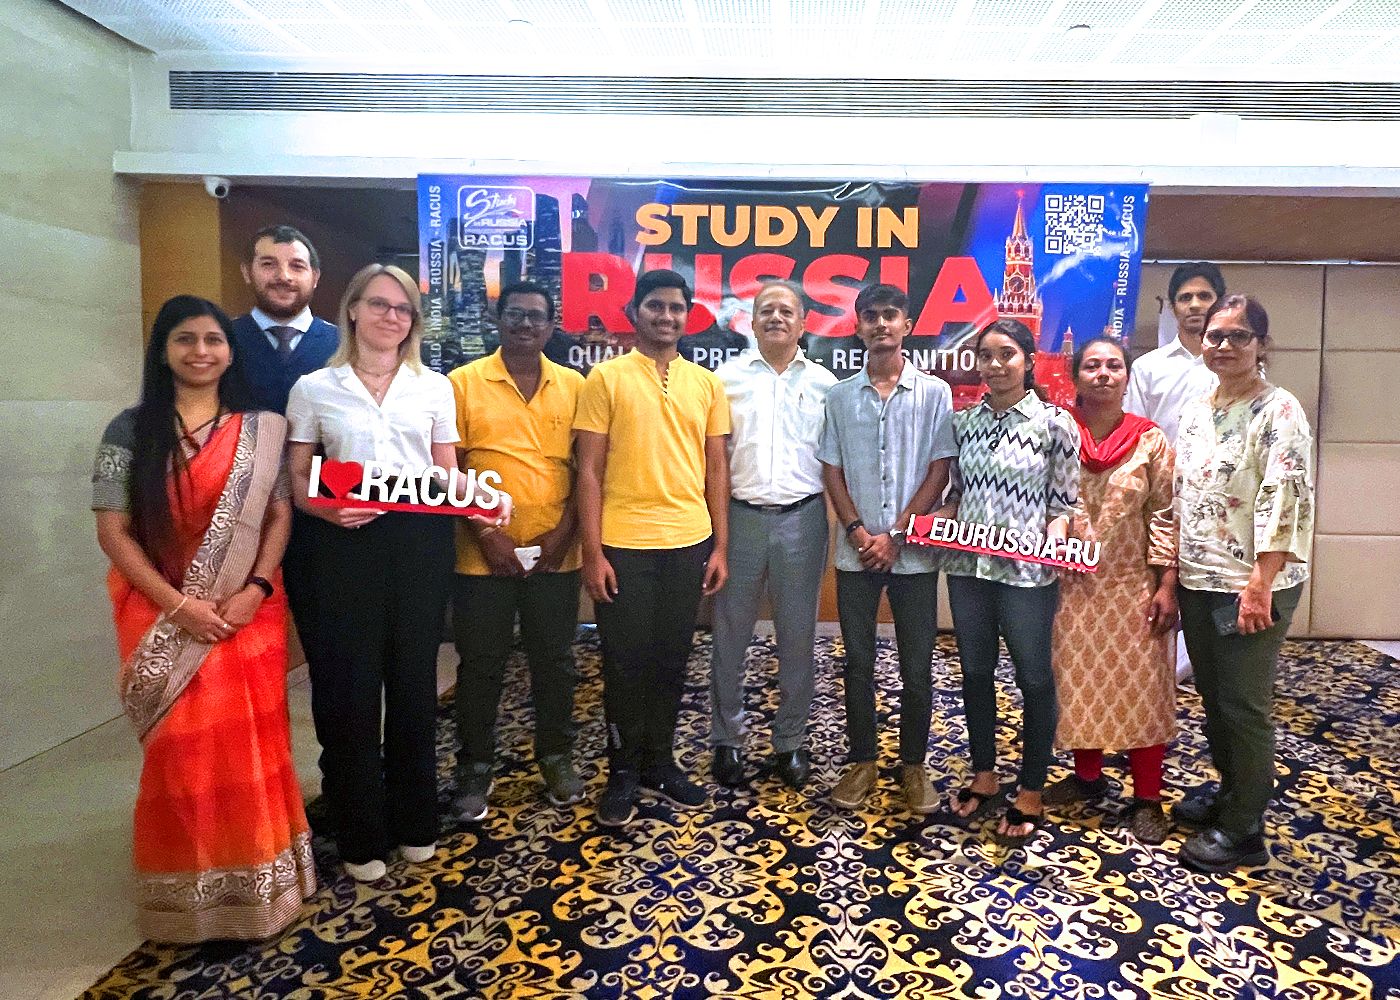 On June 12-14, 2023, RACUS organization held specialized education exhibitions "Higher Medical Education in Russia - 2023" in two cities in India: Pune and Mumbai. In Pune, the exhibition was held in the conference hall of Ramee Grand Hotel and Spa, and in Mumbai, the event was held in the conference hall of the Russian House.